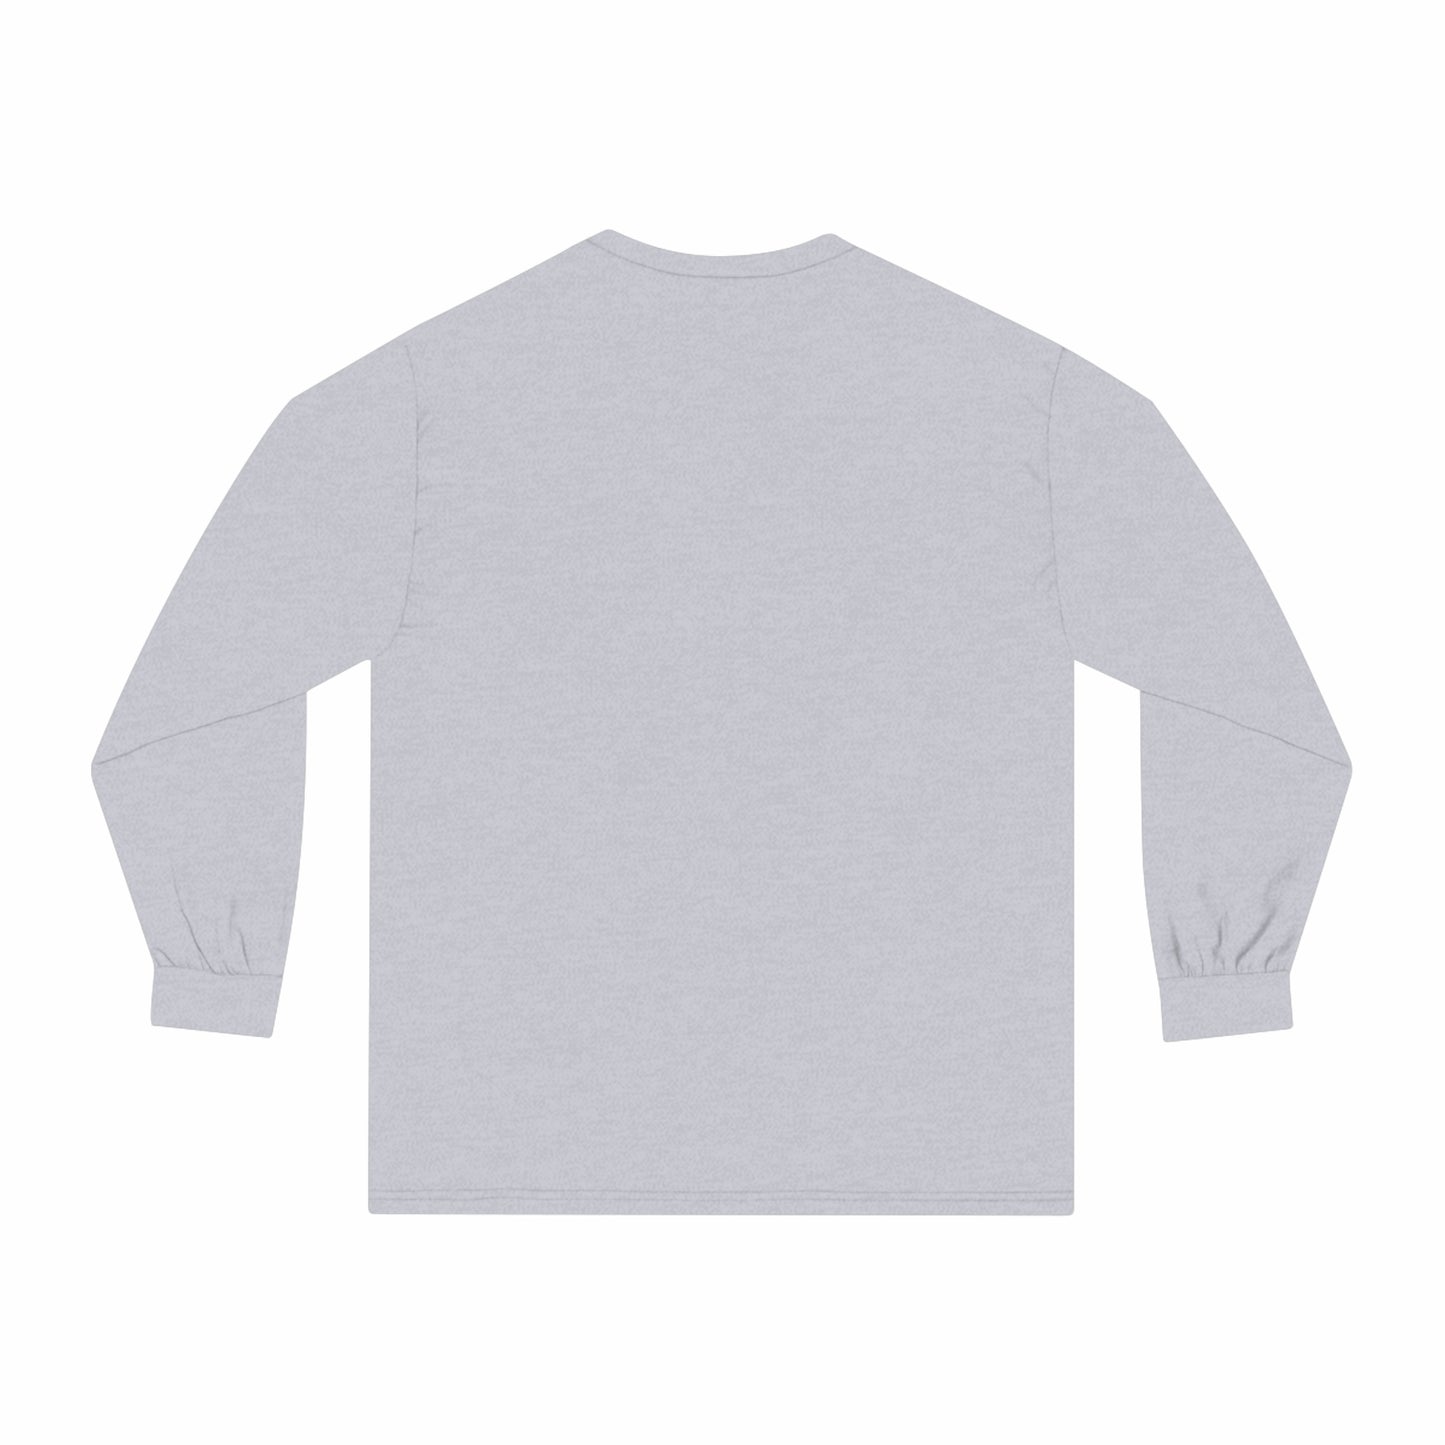 Angelo Torres Classic Long Sleeve T-Shirt